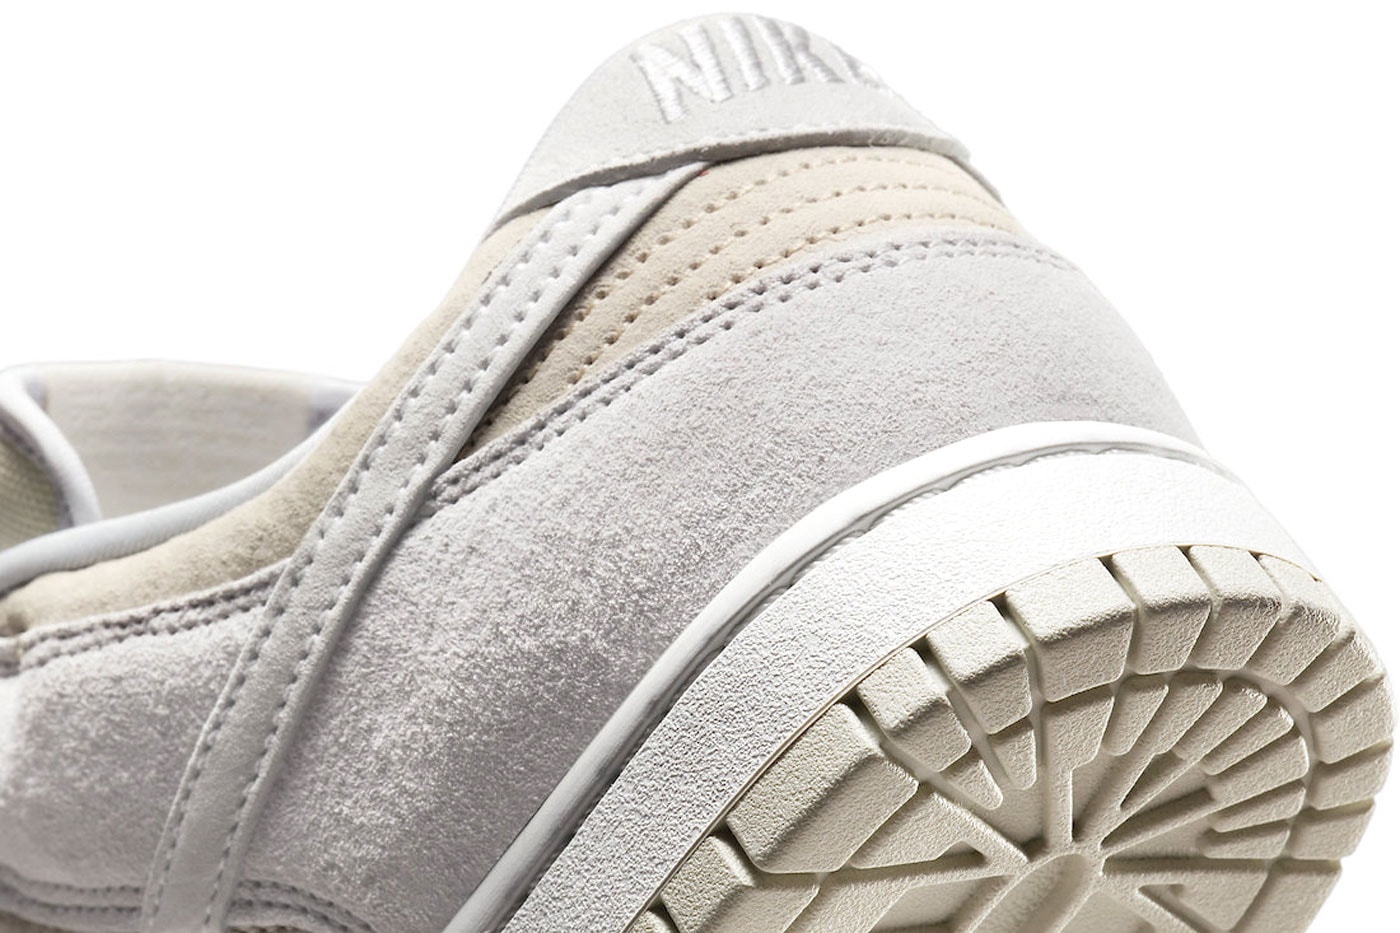 nike dunk low vast grey summit white pearl white DD8338-001 100 usd price date 2022 release info